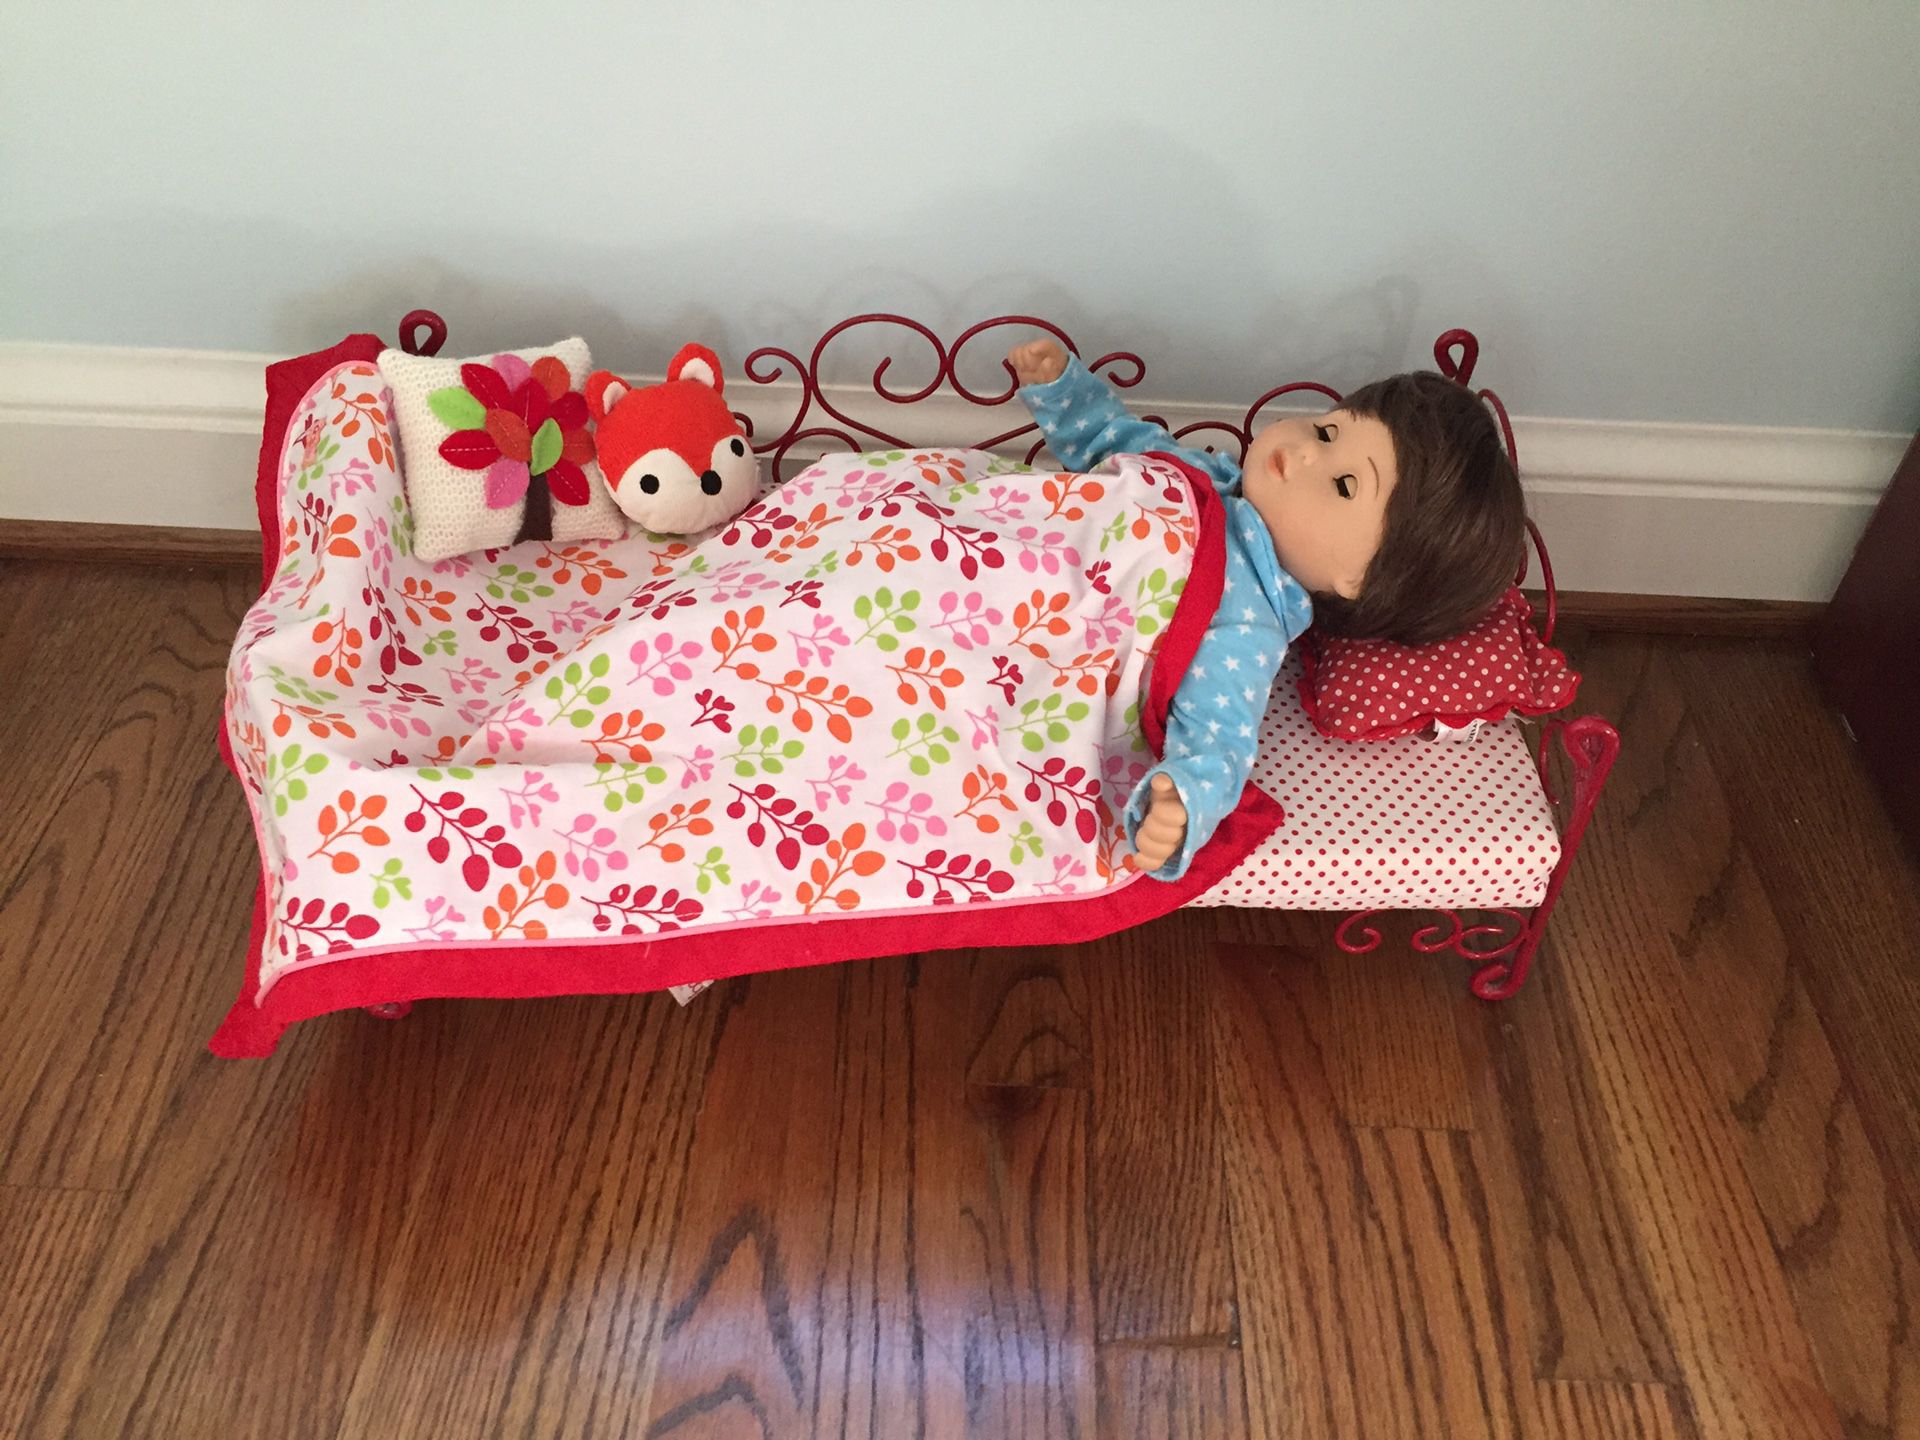 Our Generation bed, accessories, and PJs (Sized for American Girl dolls)